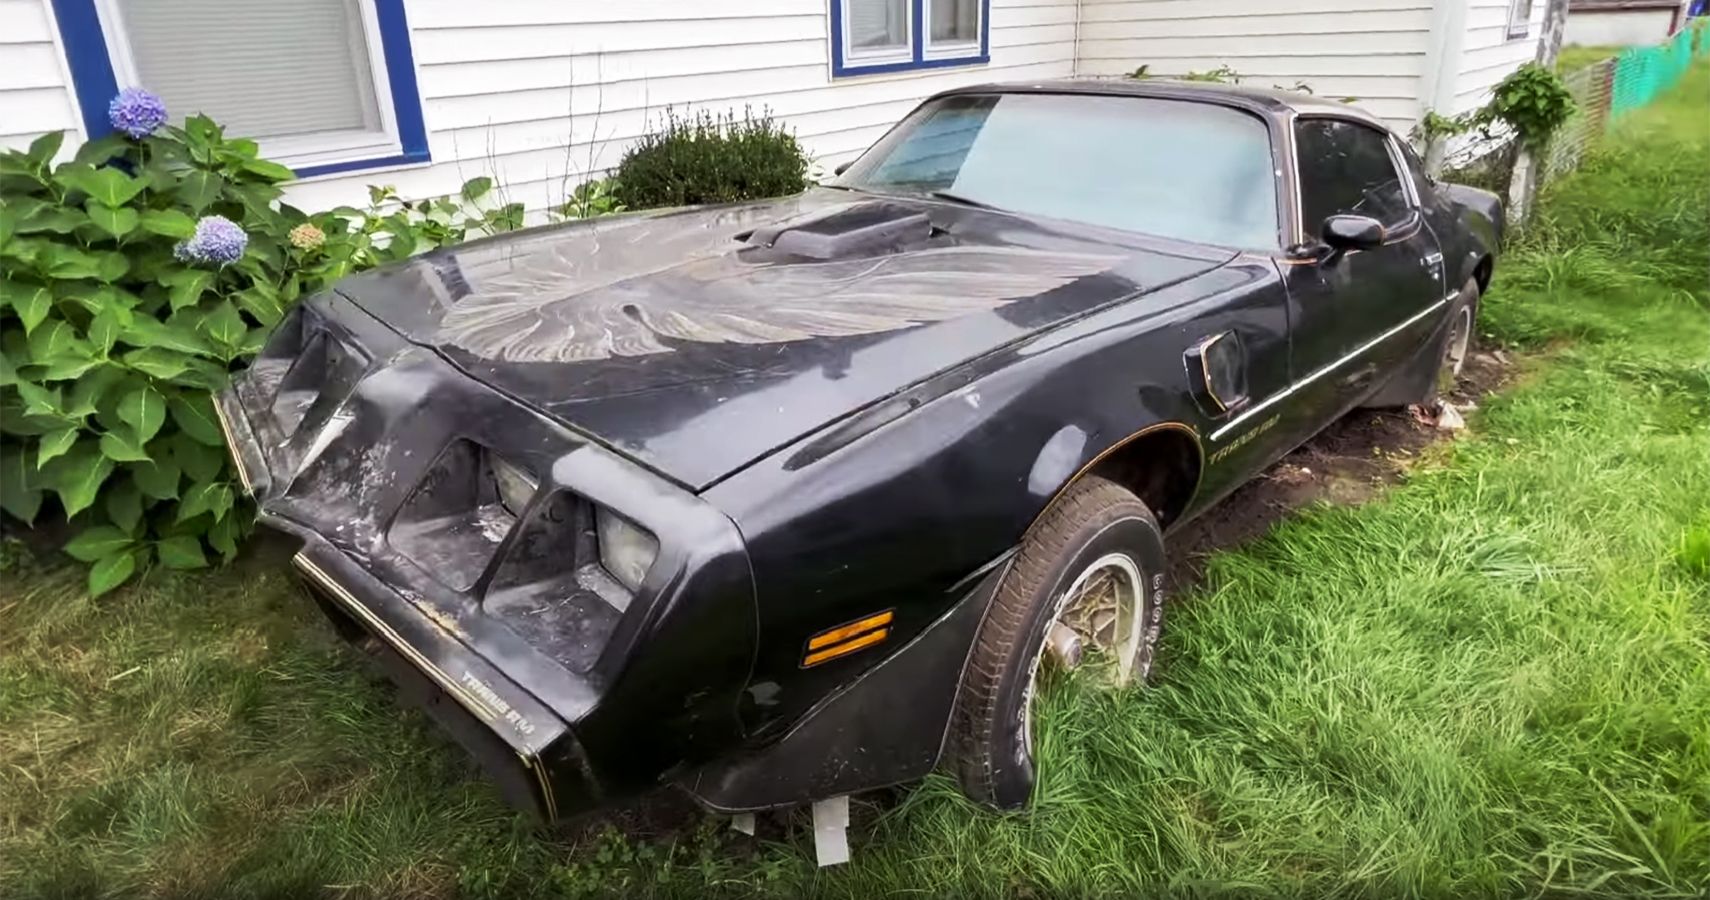 Barn Find Hunter Rescues 1979 Pontiac Trans Am After More Than 20 Years ...